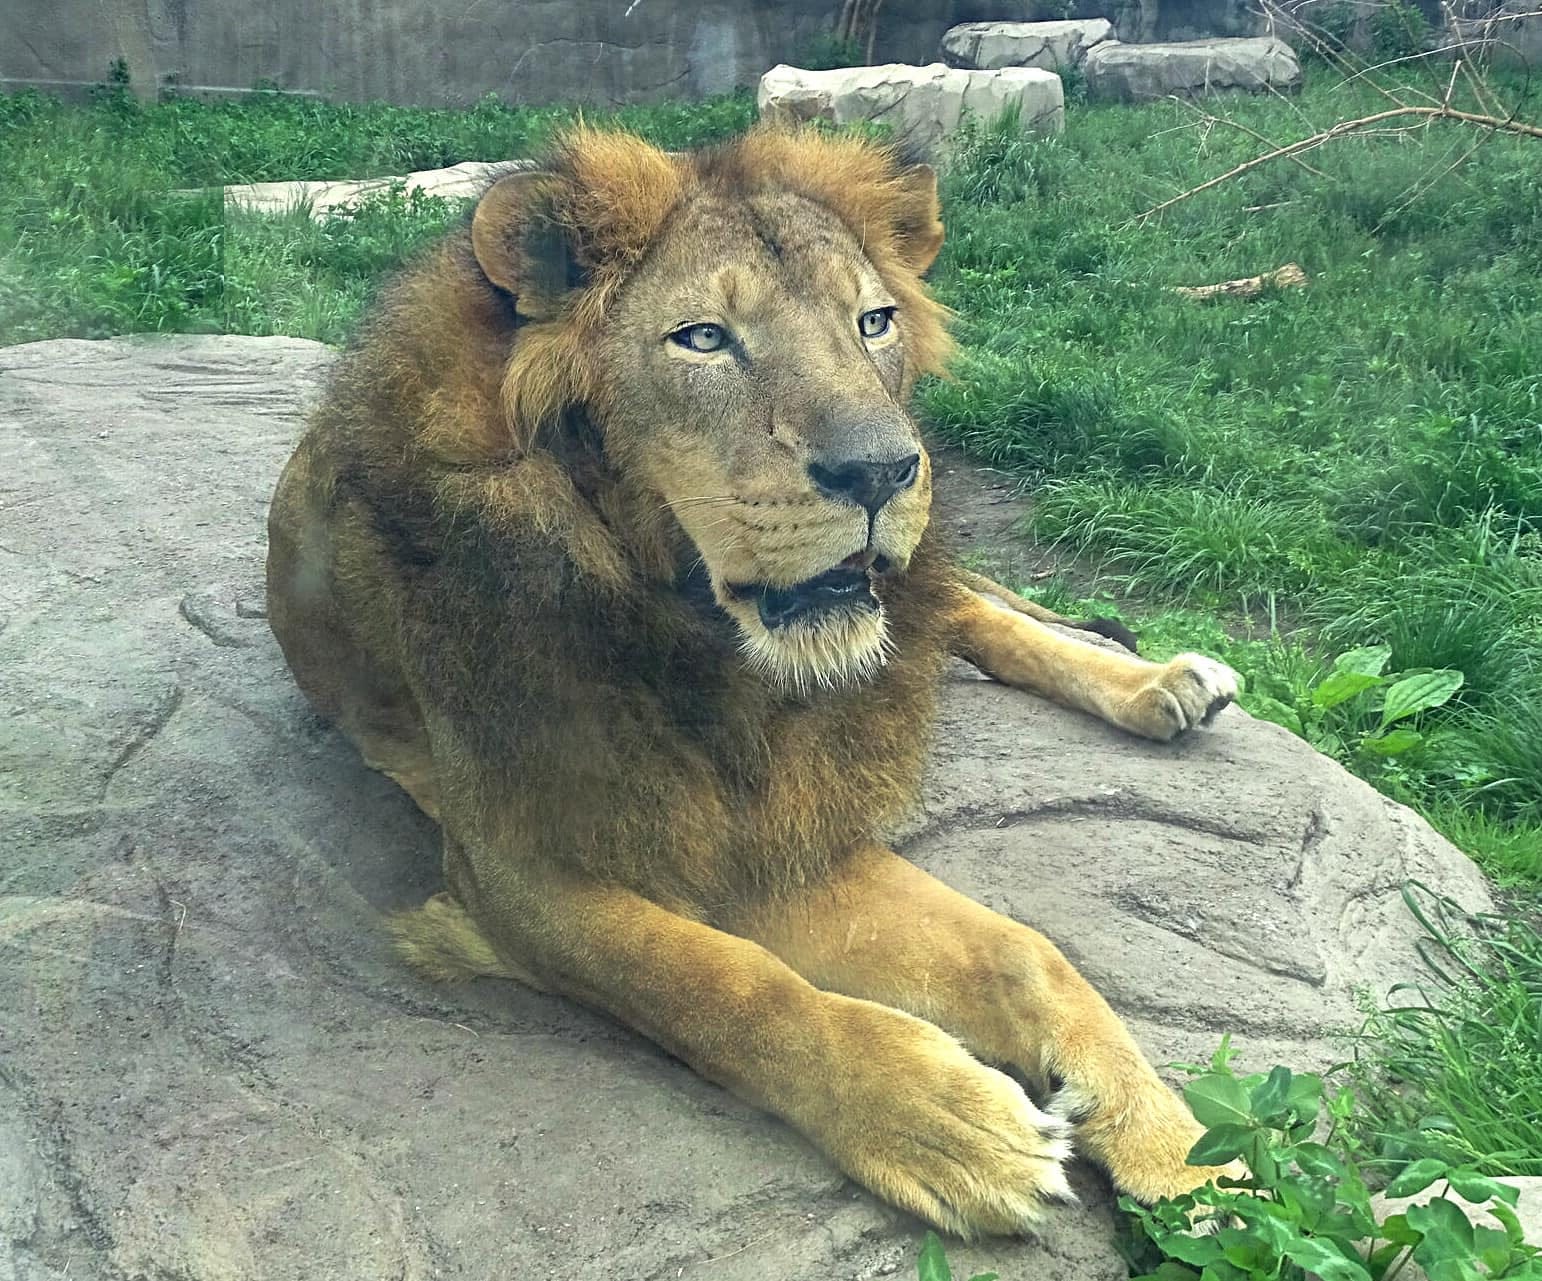 Great Plains Zoo newly built lion habitat to house its first big cat